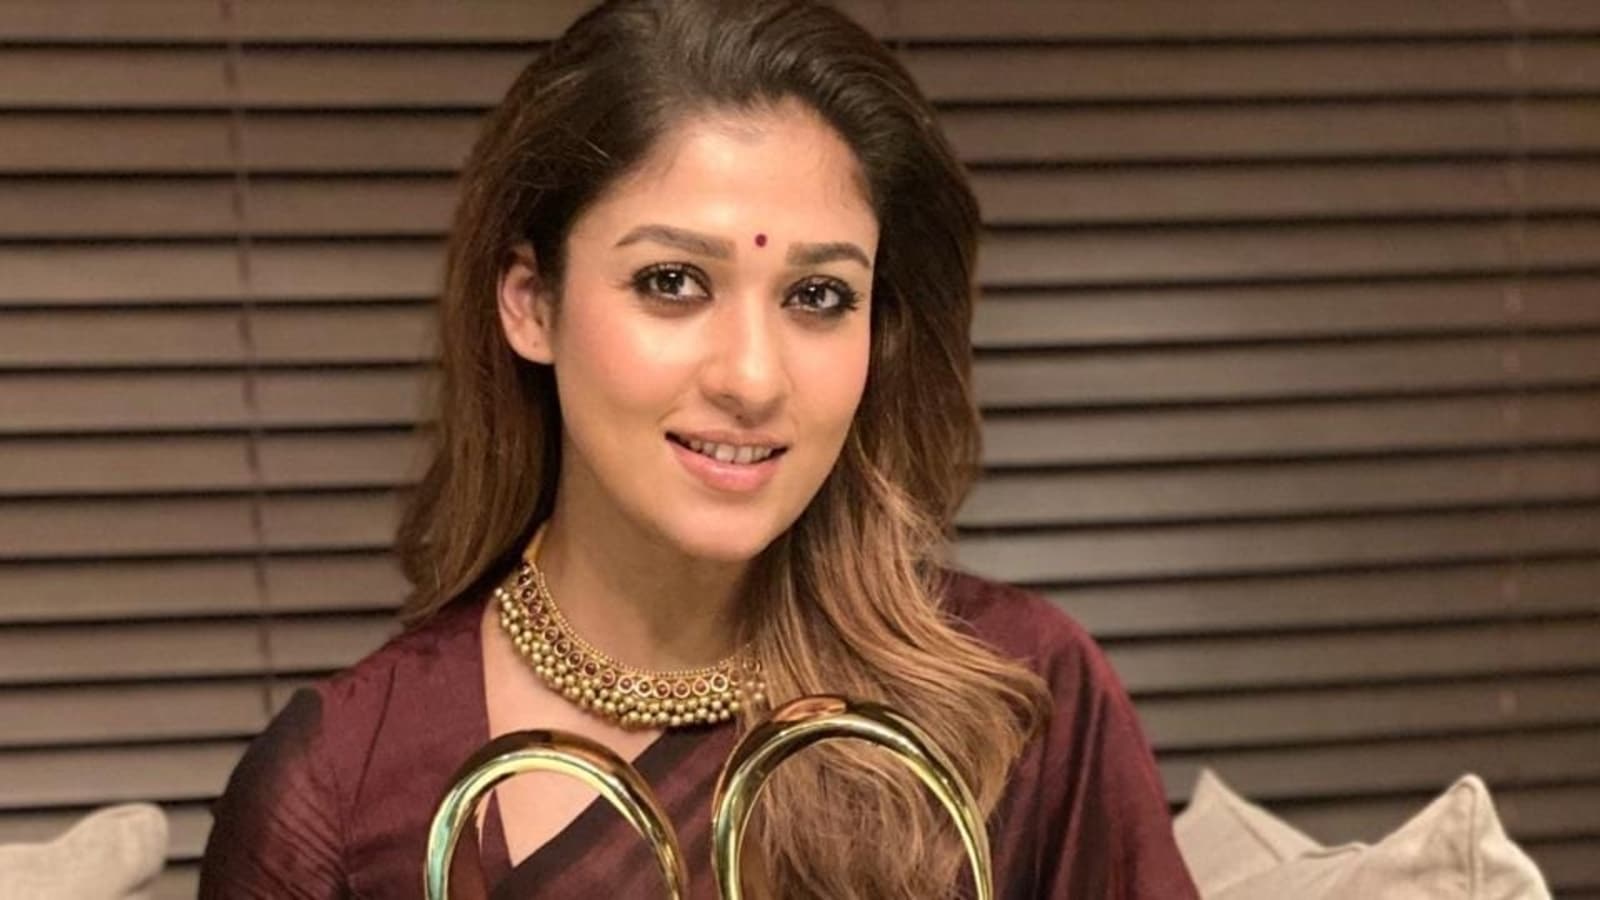 Nayanthara Xnxx Video - Nayanthara says there is so much she has 'gone through': It's not easy to  be... - Hindustan Times